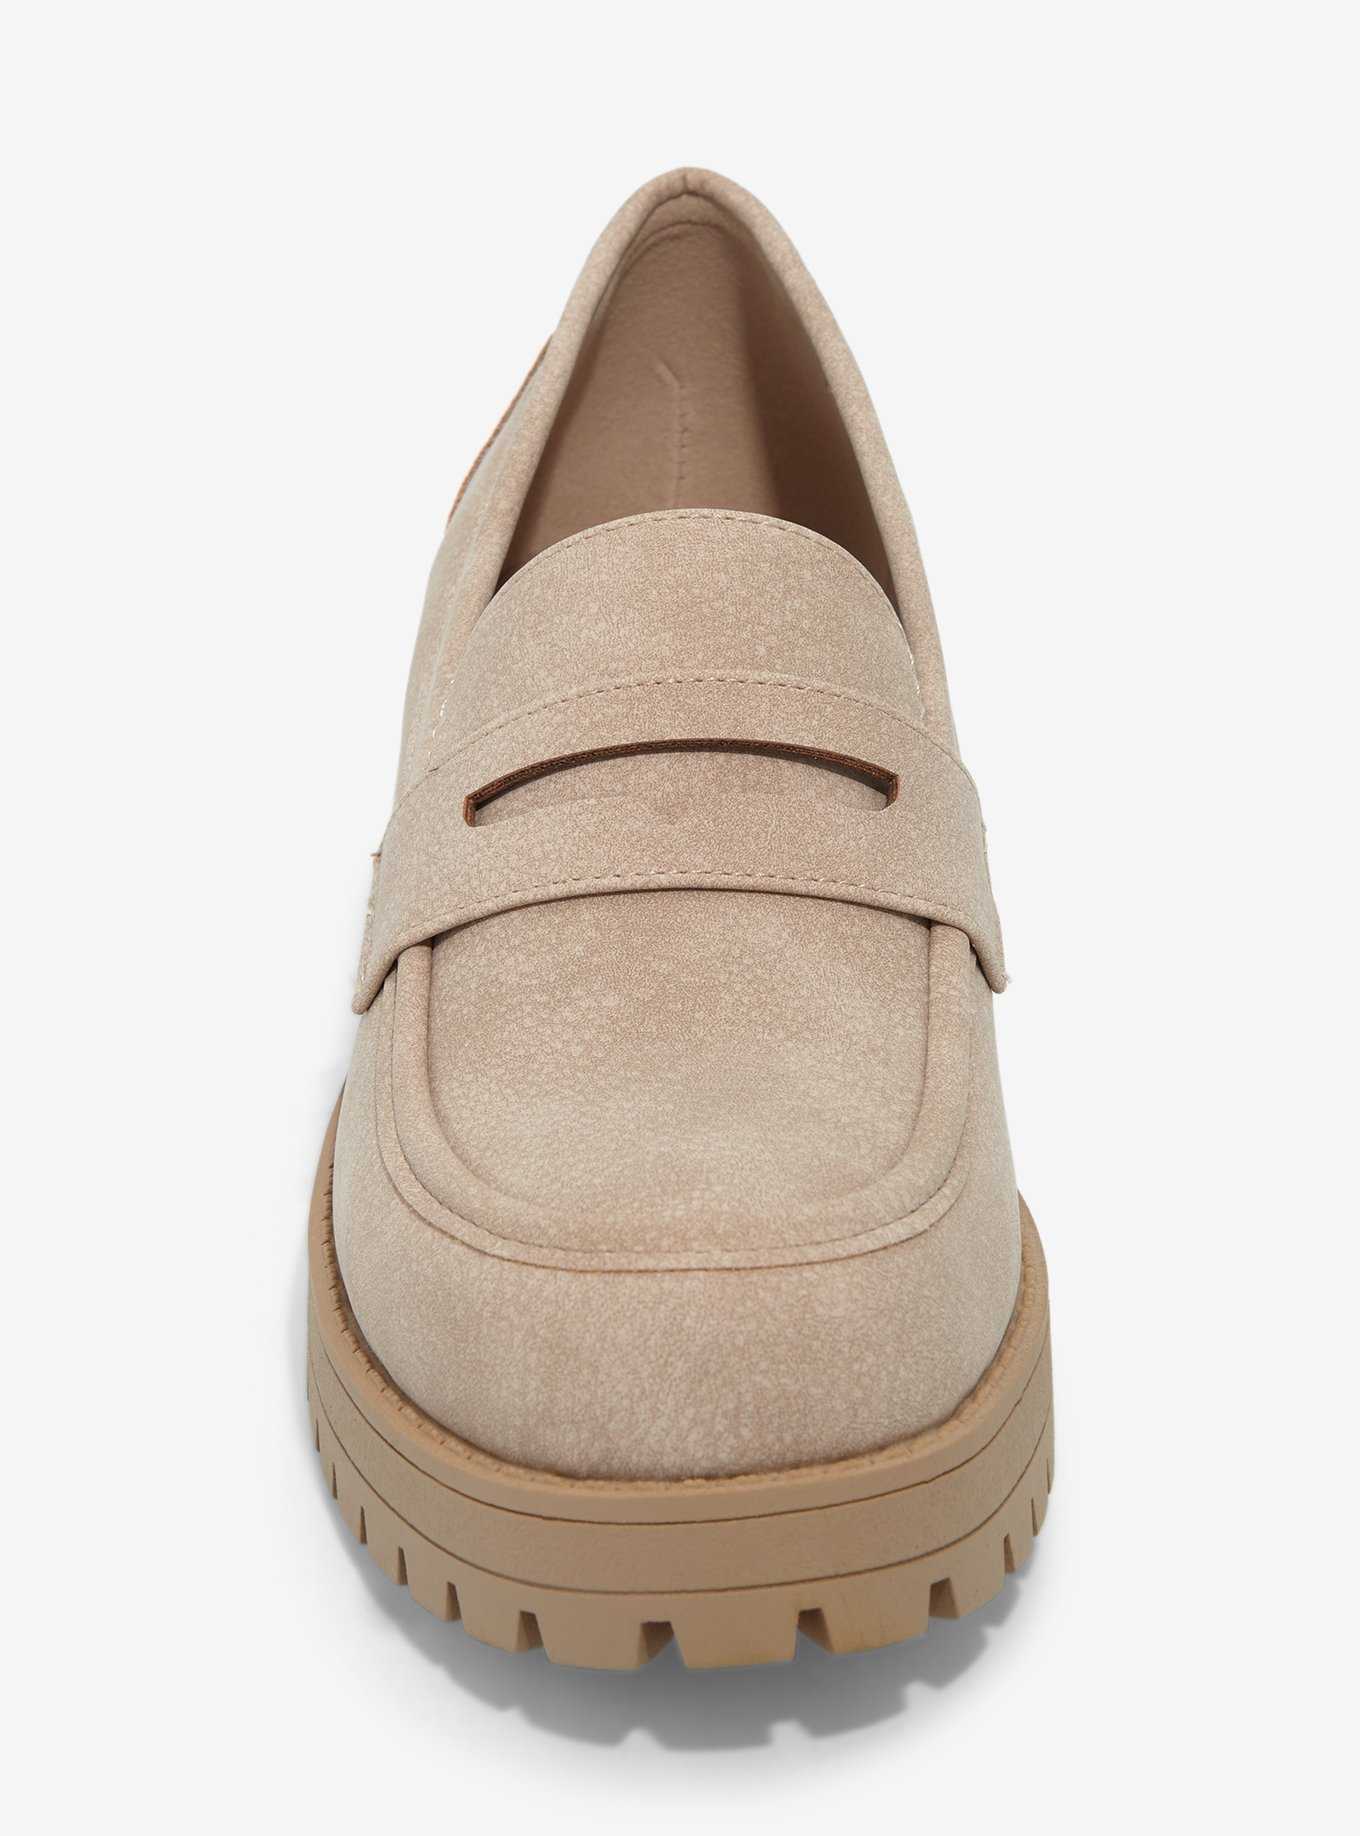 Dirty Laundry Tan Voidz Casual Loafers, , hi-res